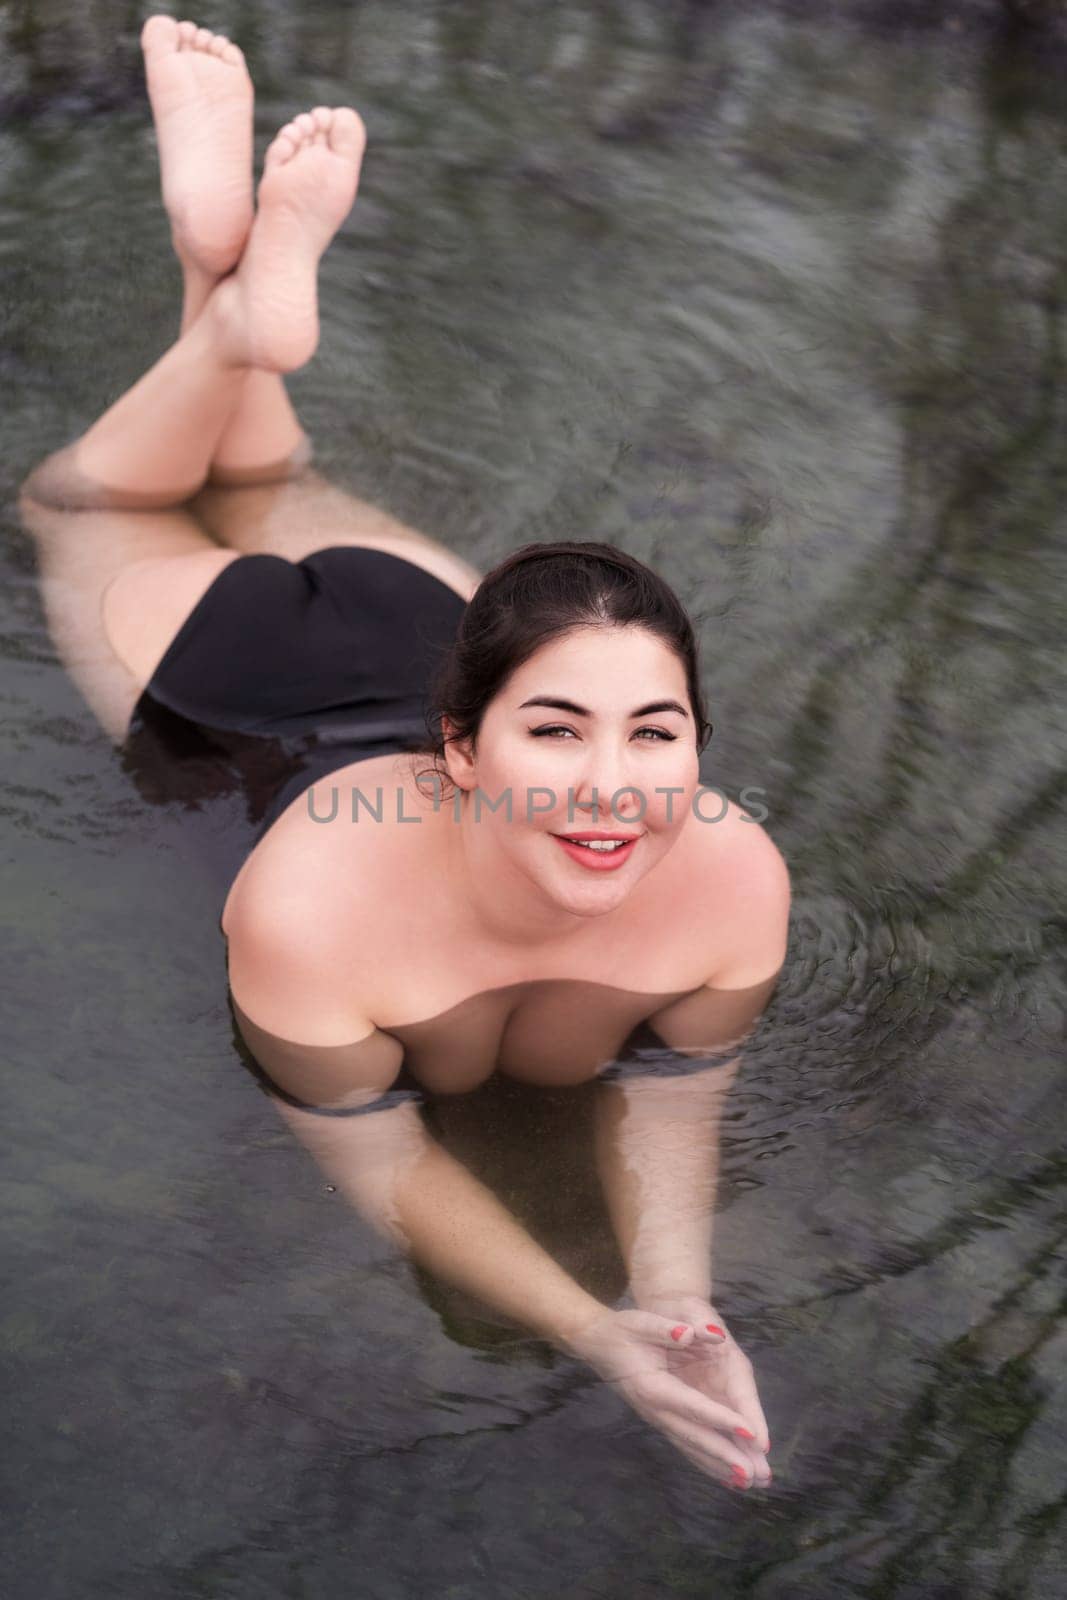 Curvy full figured model in black swimming costume lying in geothermal mineral water in outdoor pool at health spa, hot springs resort. Woman looking at camera, smiling. Body positive. High angle shot